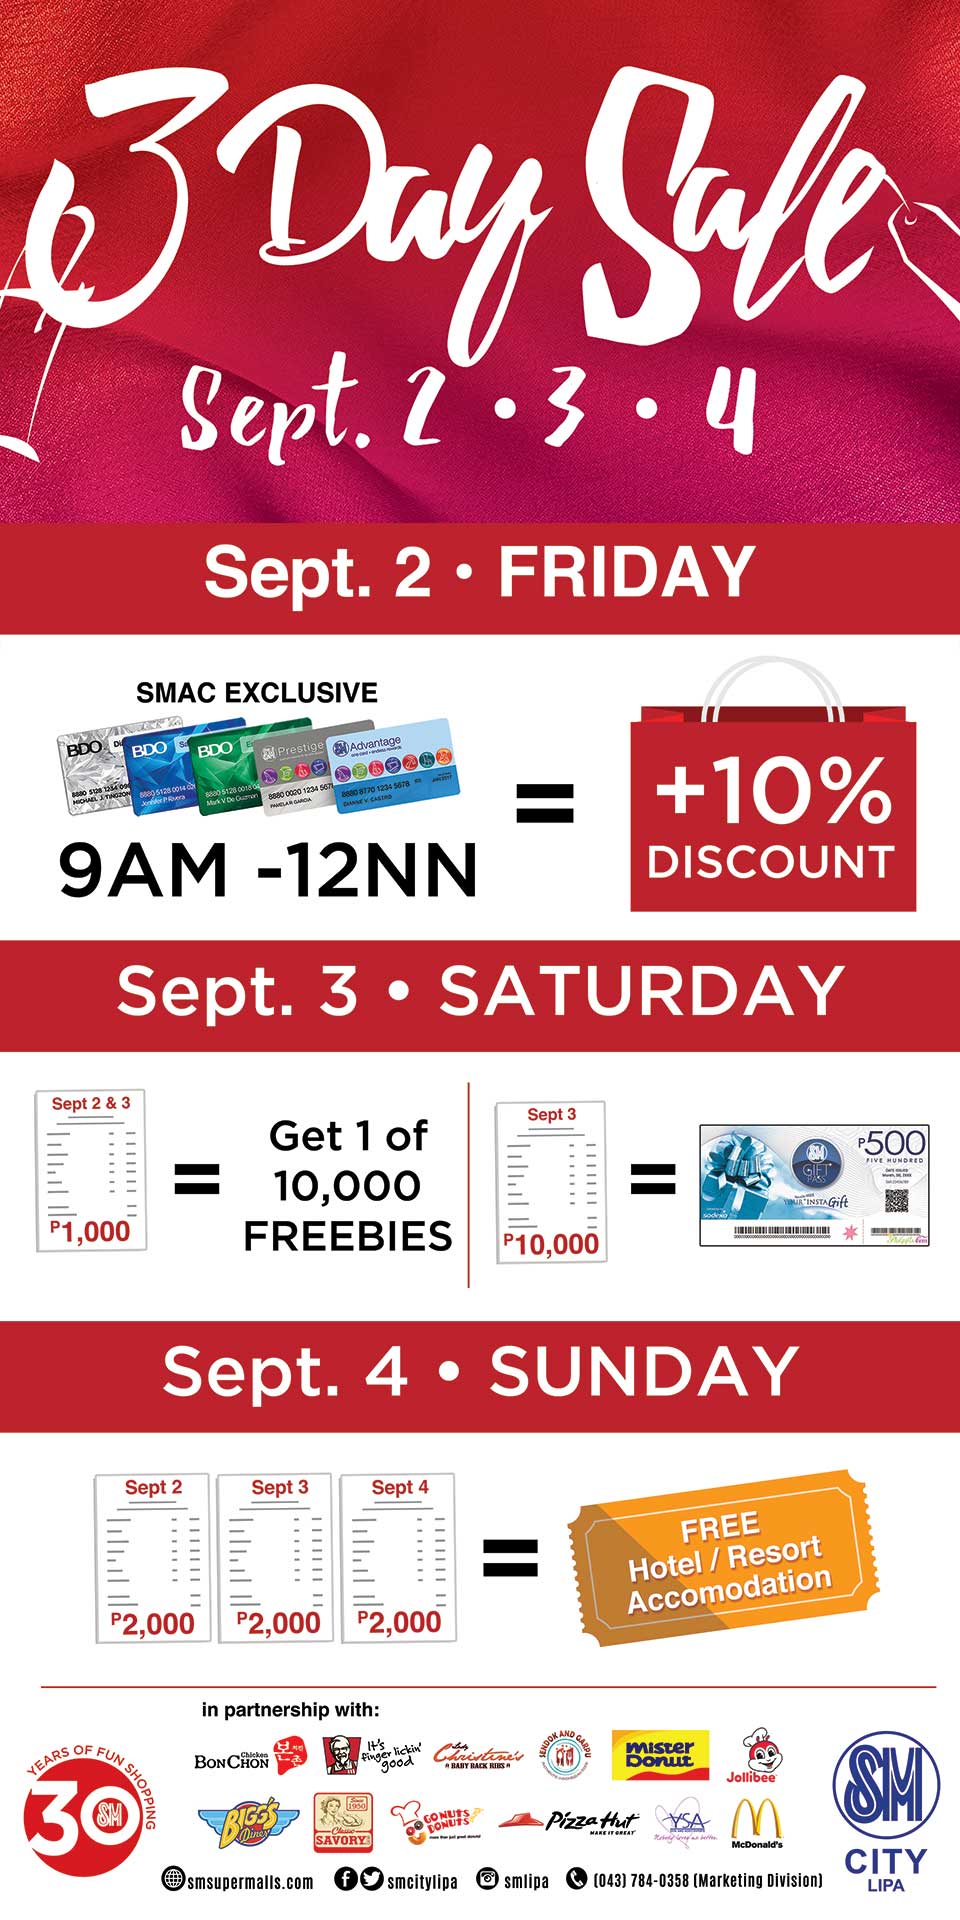 9 Shopping Tips for SM Lipa’s 3-day Sale